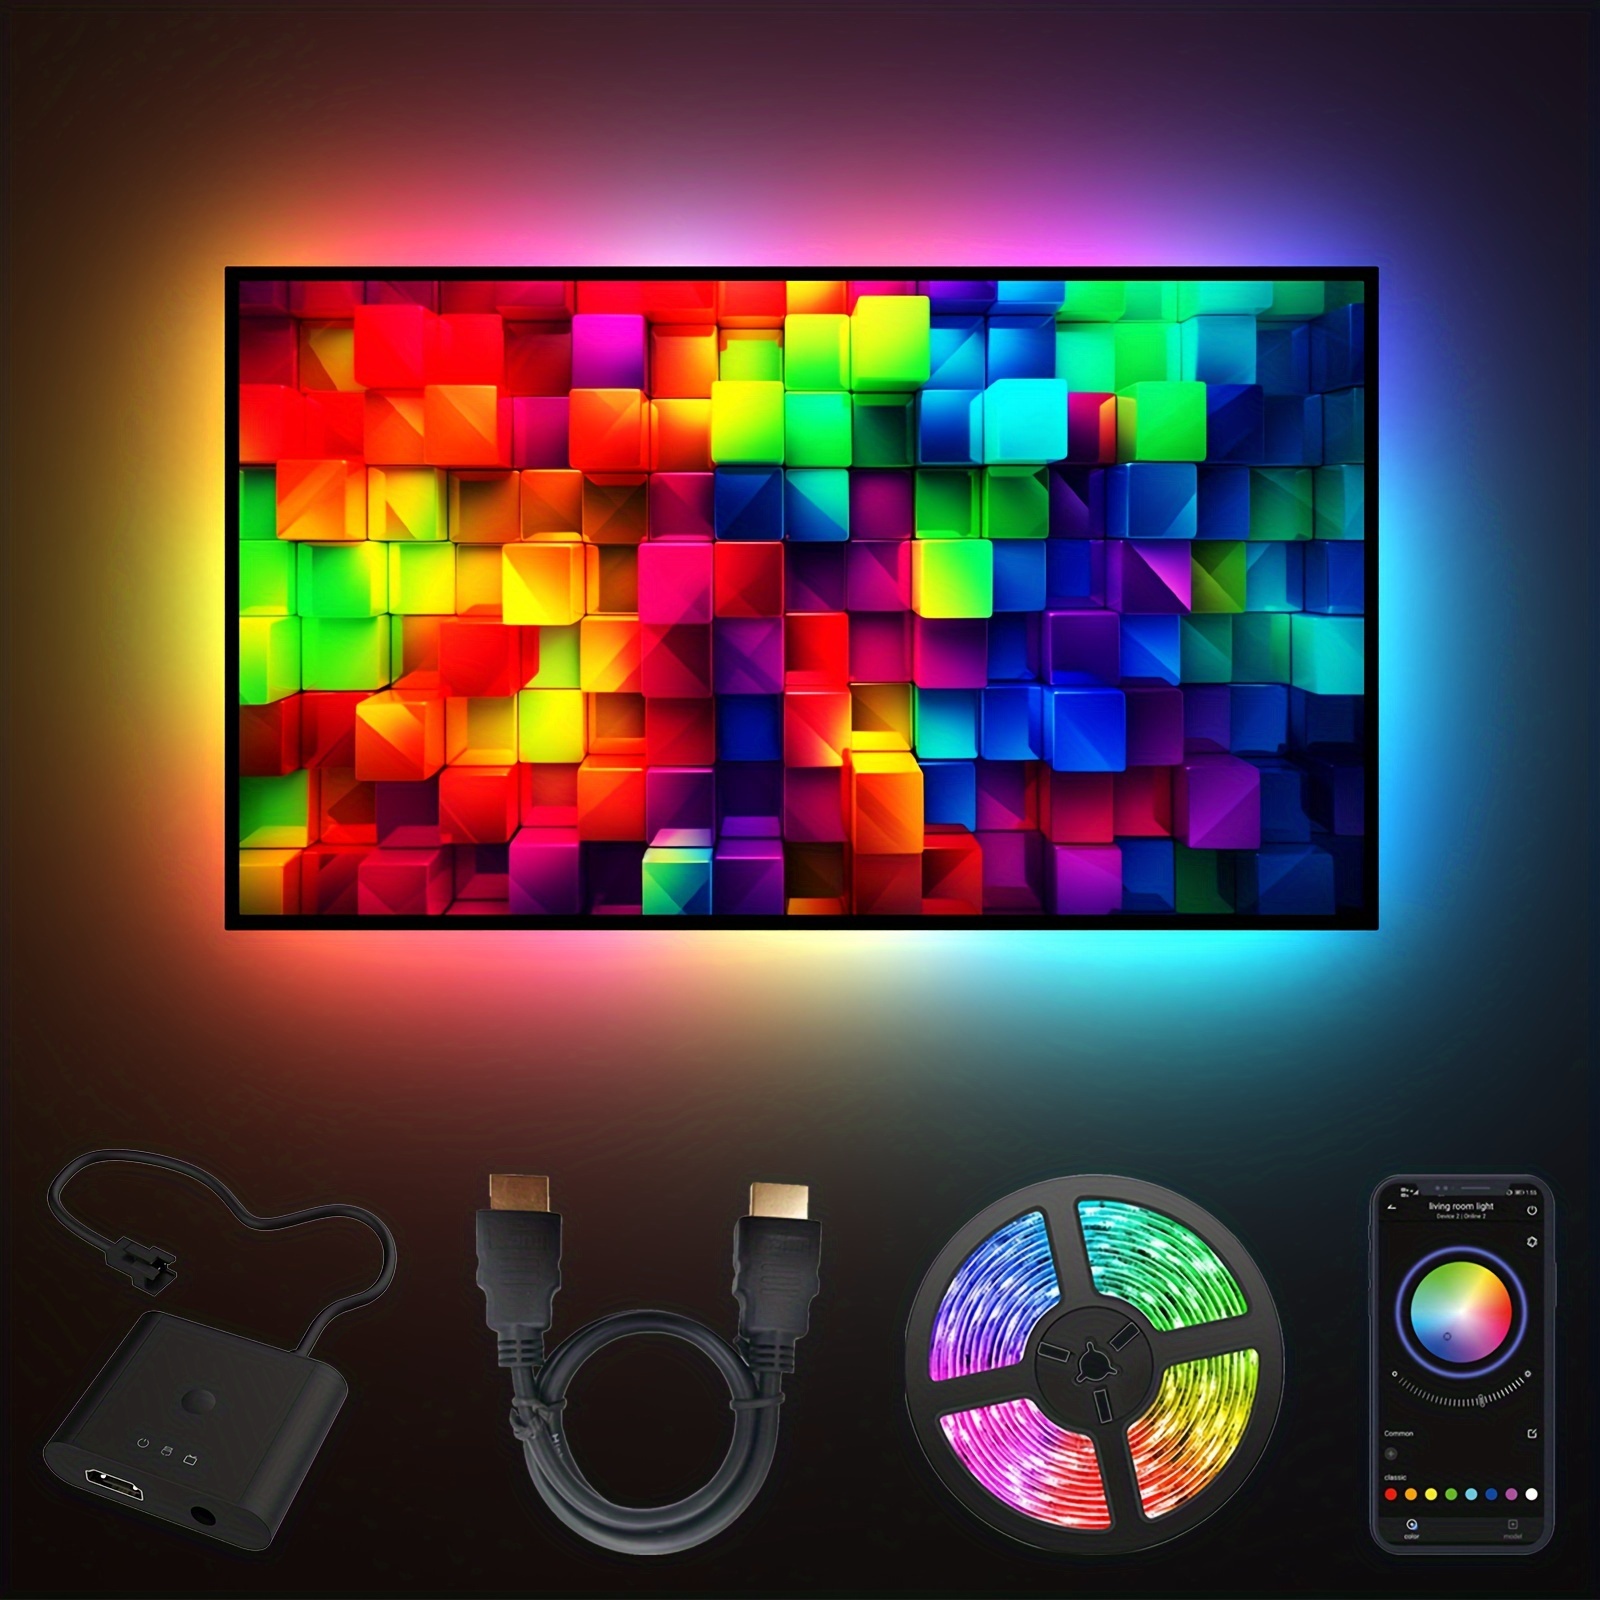 

Neonaze Tv Backlights, 1.4 4k30hz Sync Box, Lights That Sync With Picture, Follow The Audio Rhythm, Game Accessories, For 50-70-inch Screens,